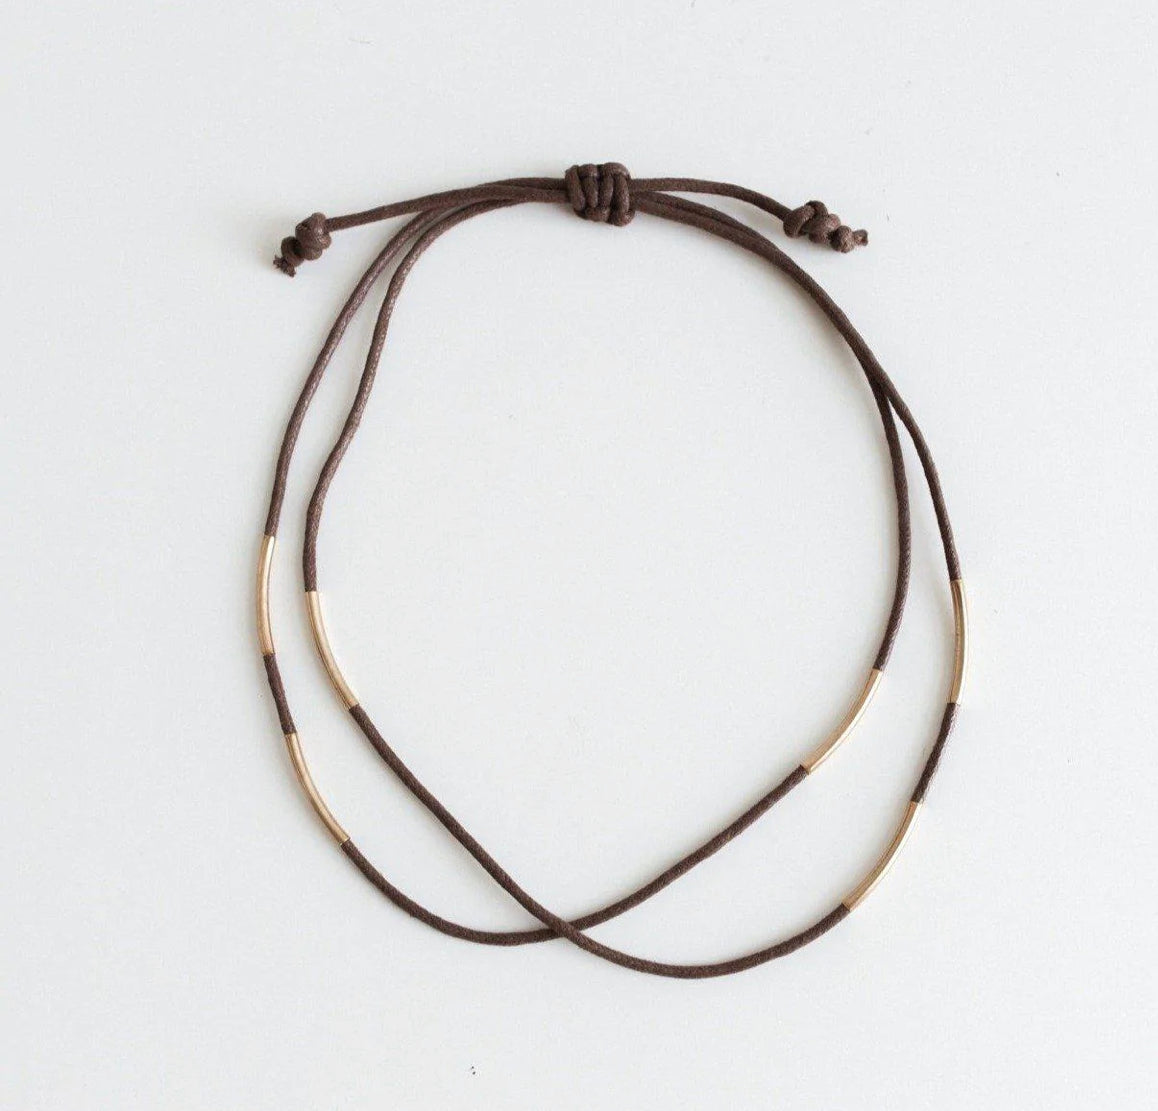 Rope Band with Beads - Dark Brown + Brass